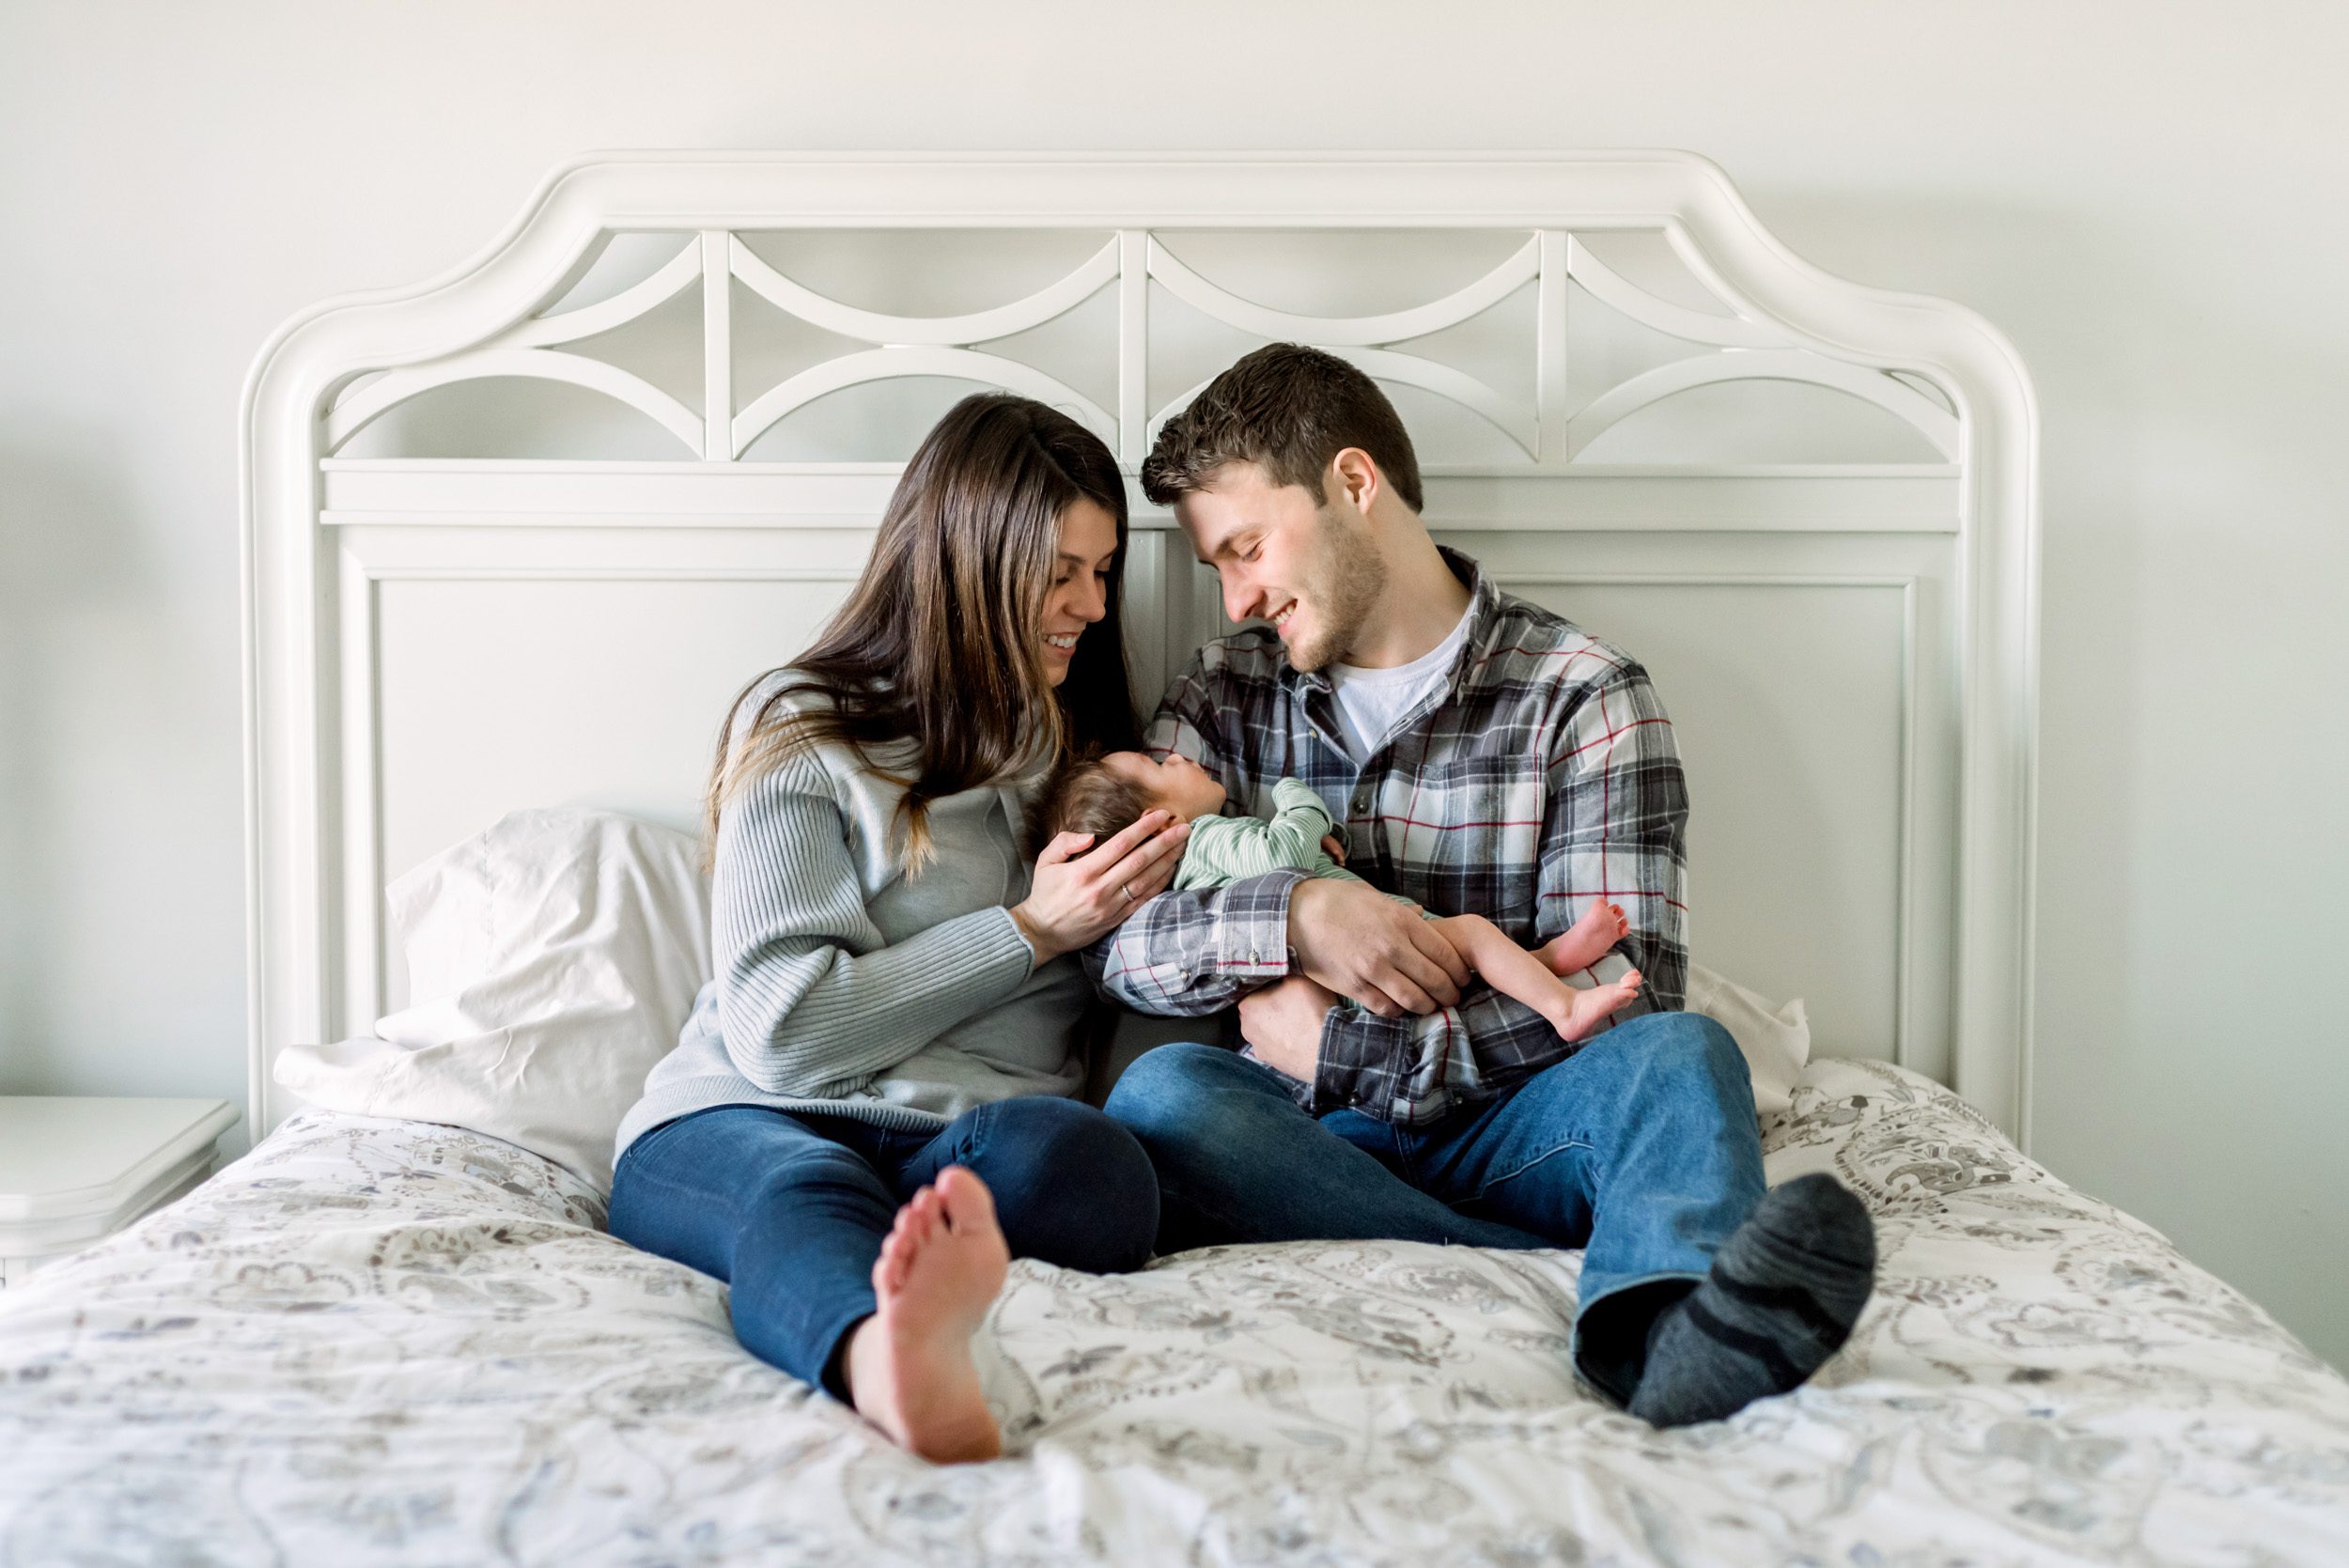 Newborn picture of parents sitting on a bed and smiling down at their baby son in their arms during an in home newborn photo session